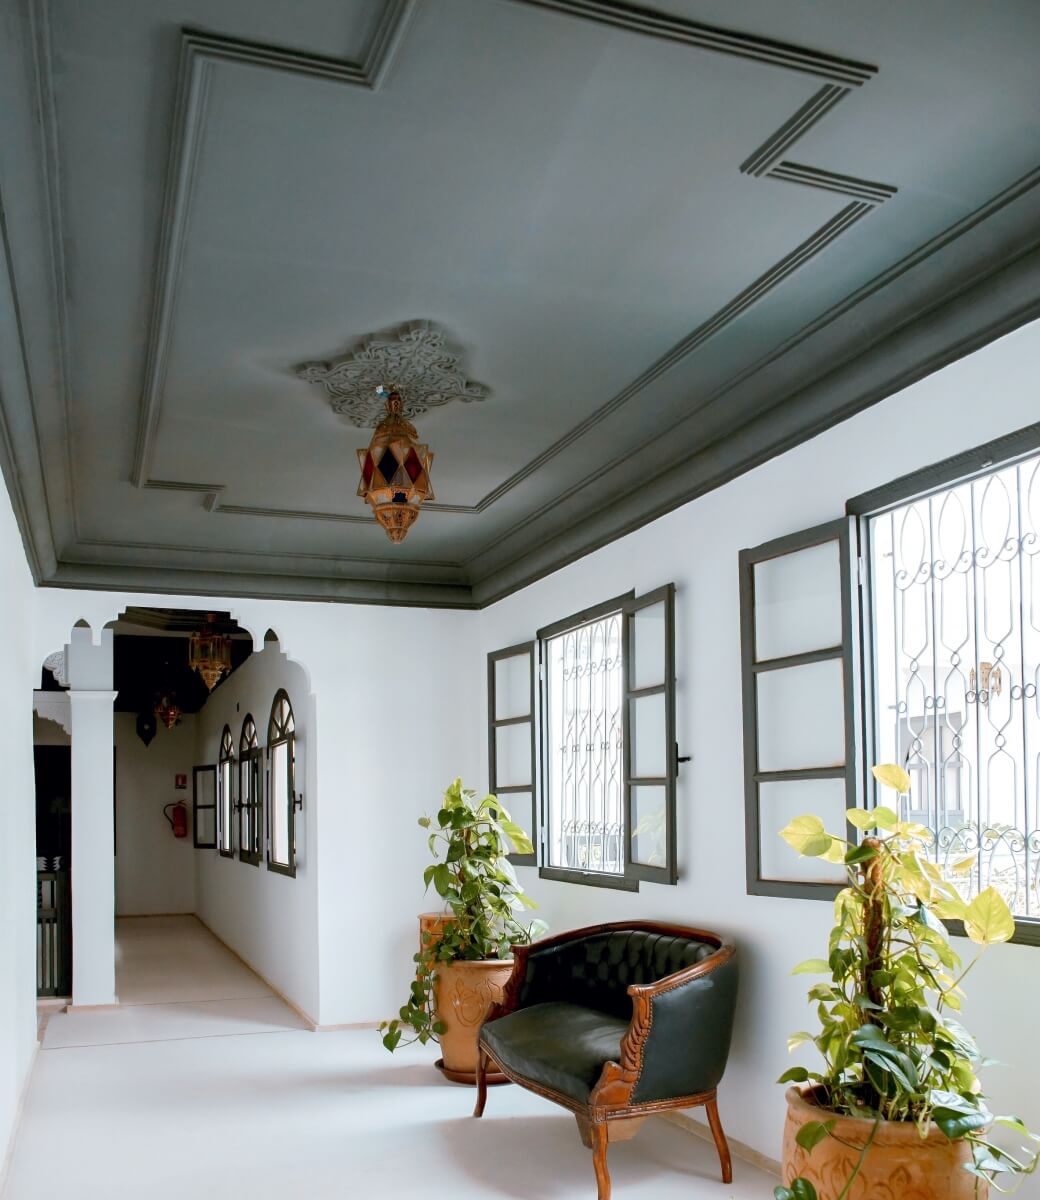 Applied molding on a ceiling can make a beautiful statement, photography by Toa Heftiba